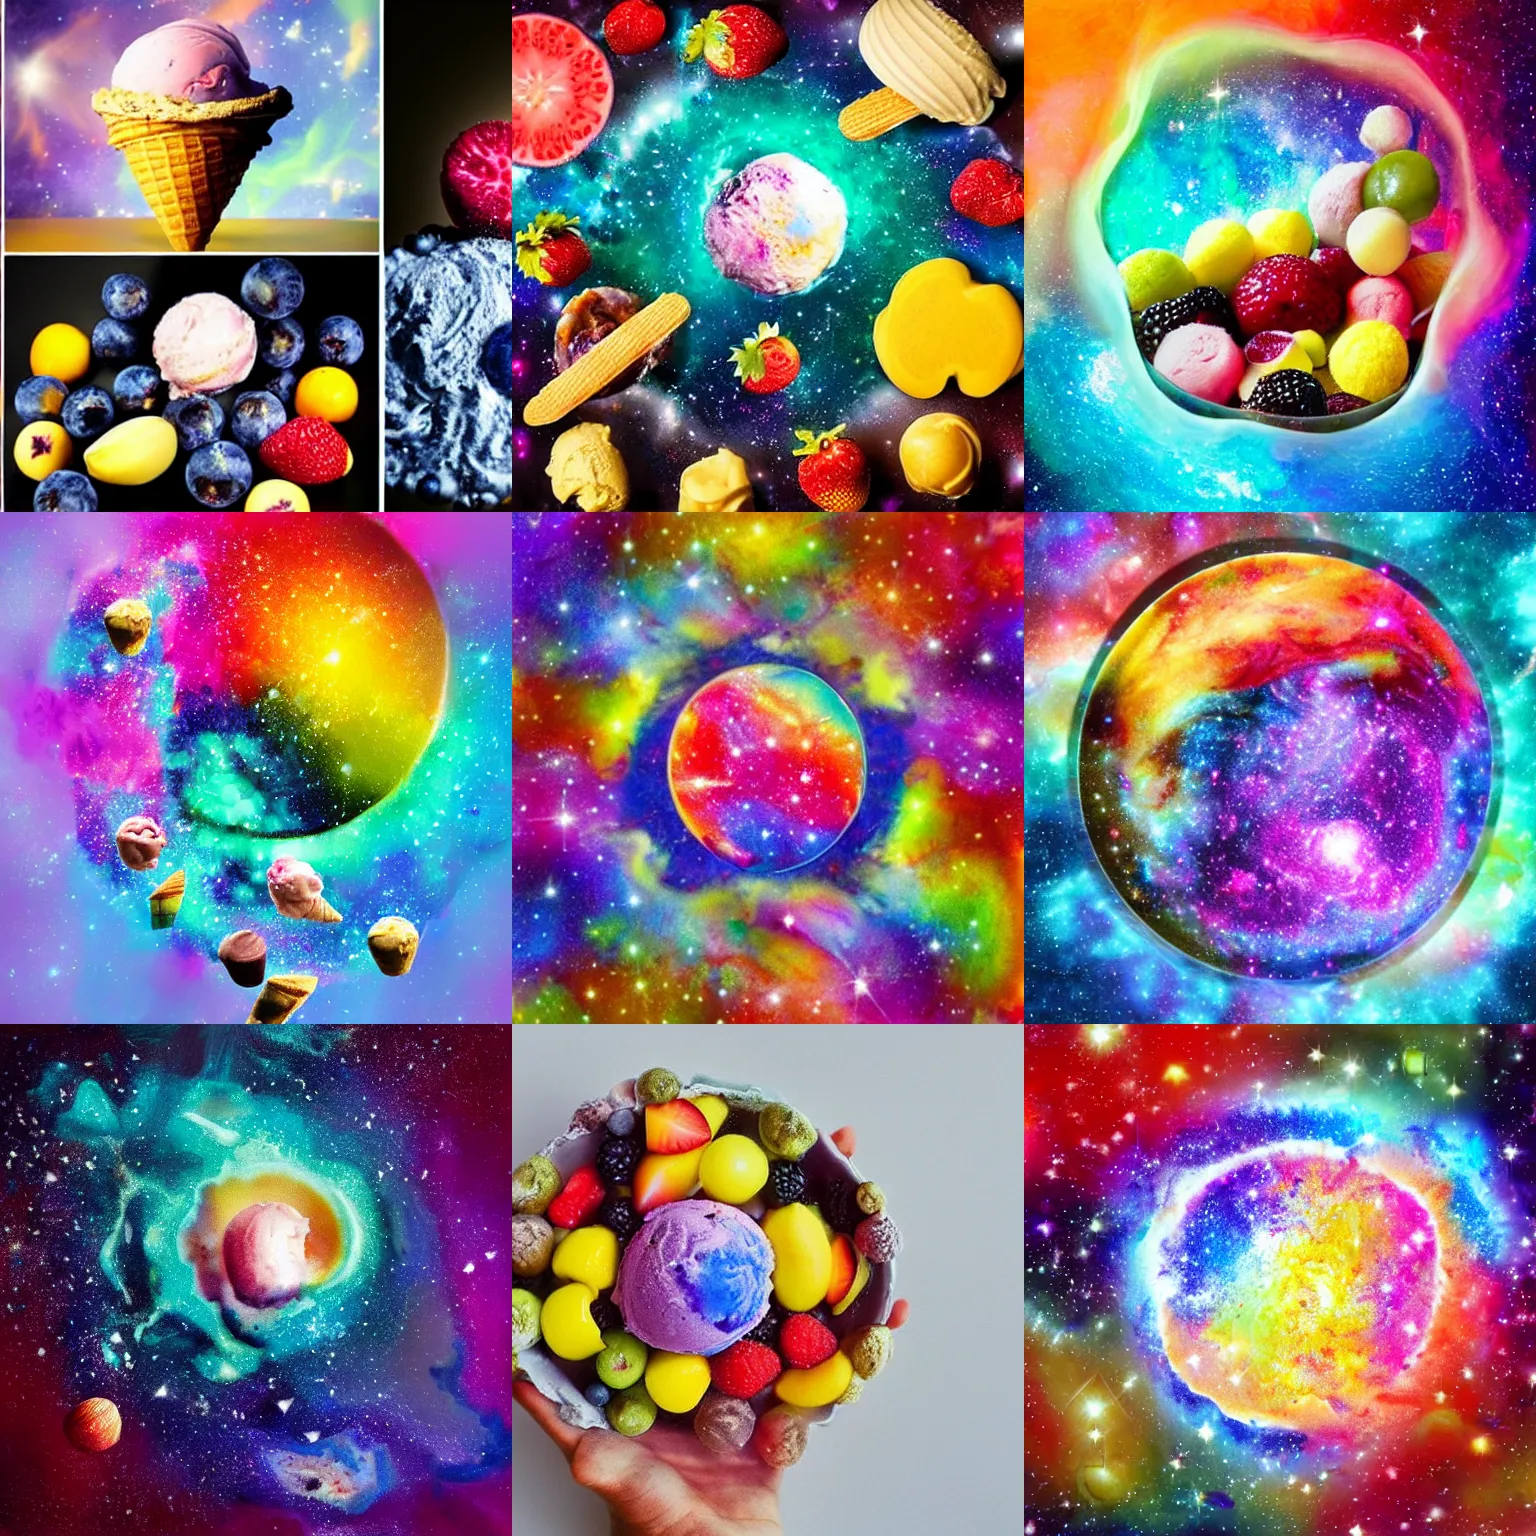 Prompt: A beautiful galaxy made of ice-cream and fruits